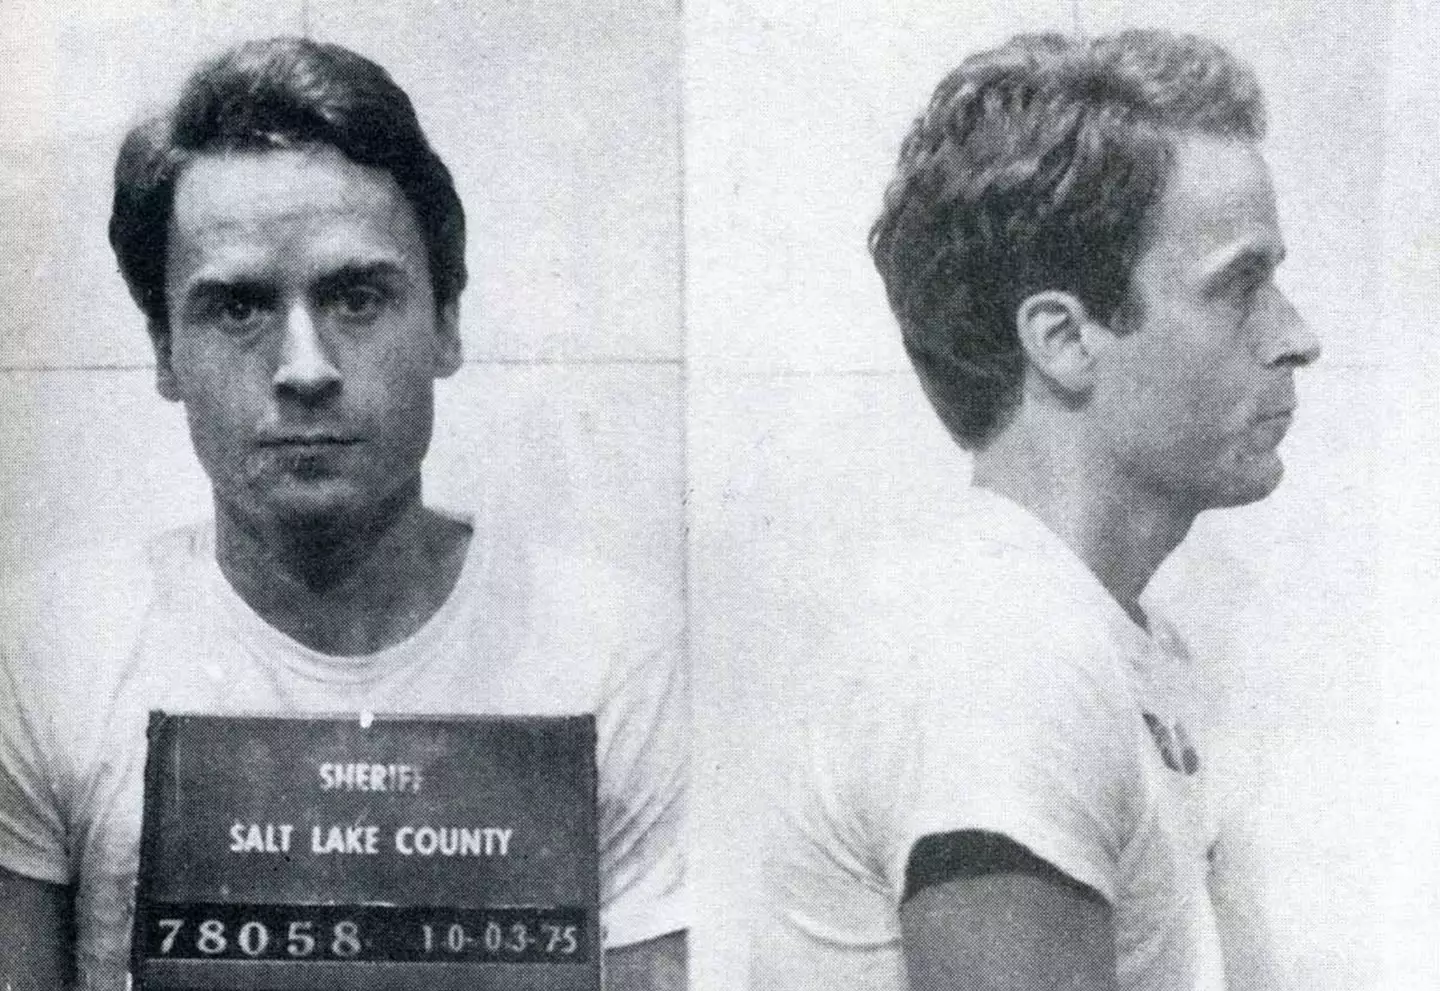 Ted Bundy had a pretty dull last meal.